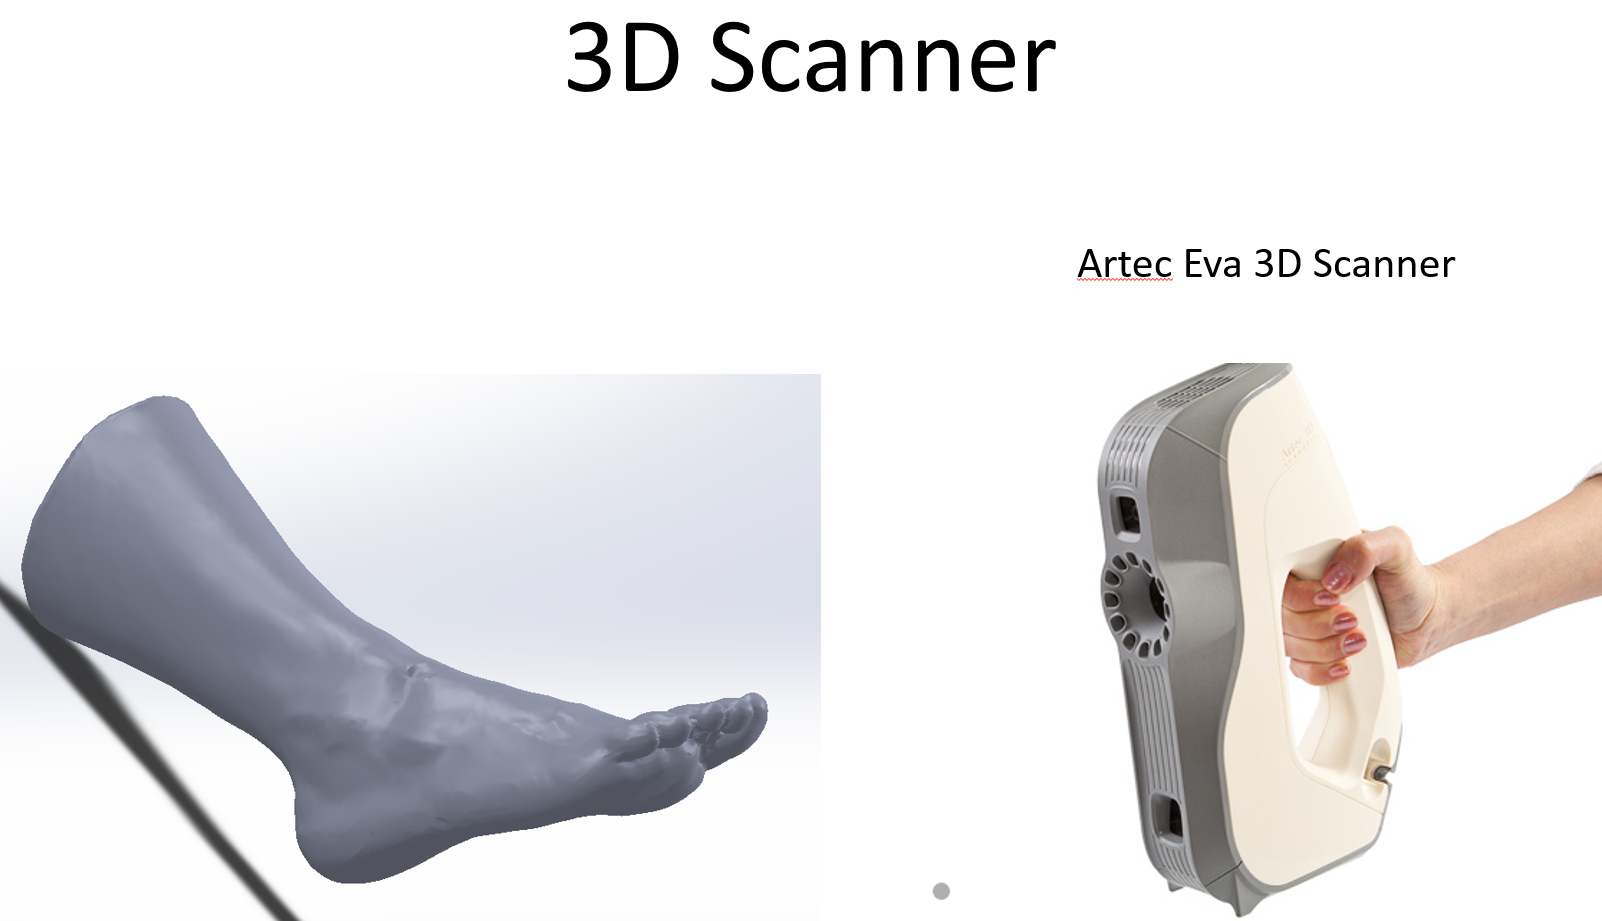 Photo of a handheld 3D scanner along with a graphic of a 3D scanned foot illustration. 